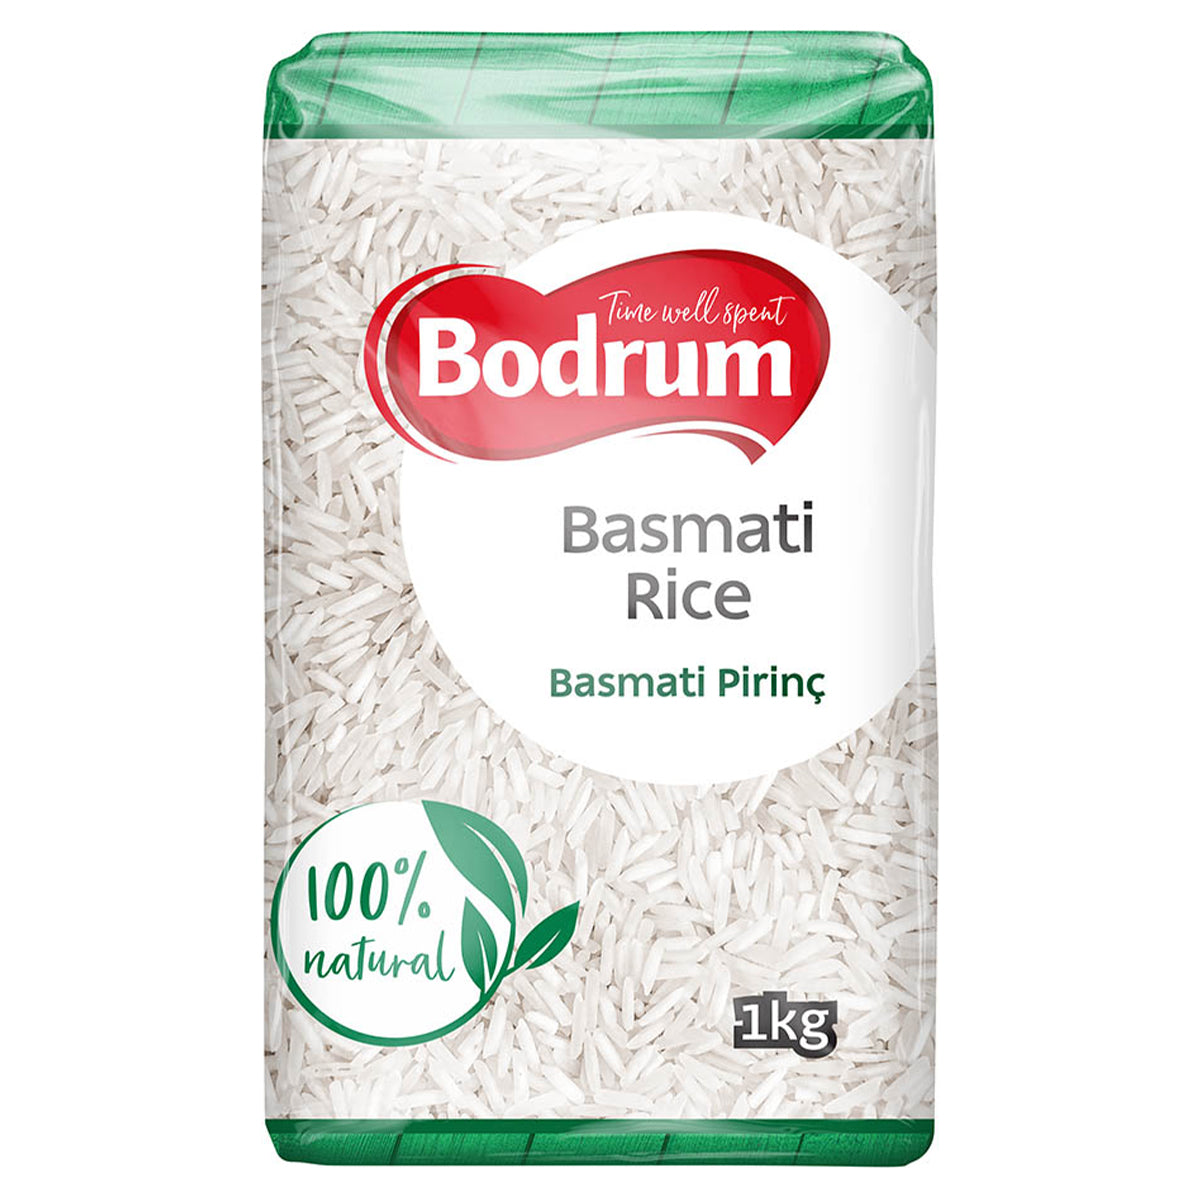 Bodrum - Basmati Rice - 1kg from the brand Bodrum.